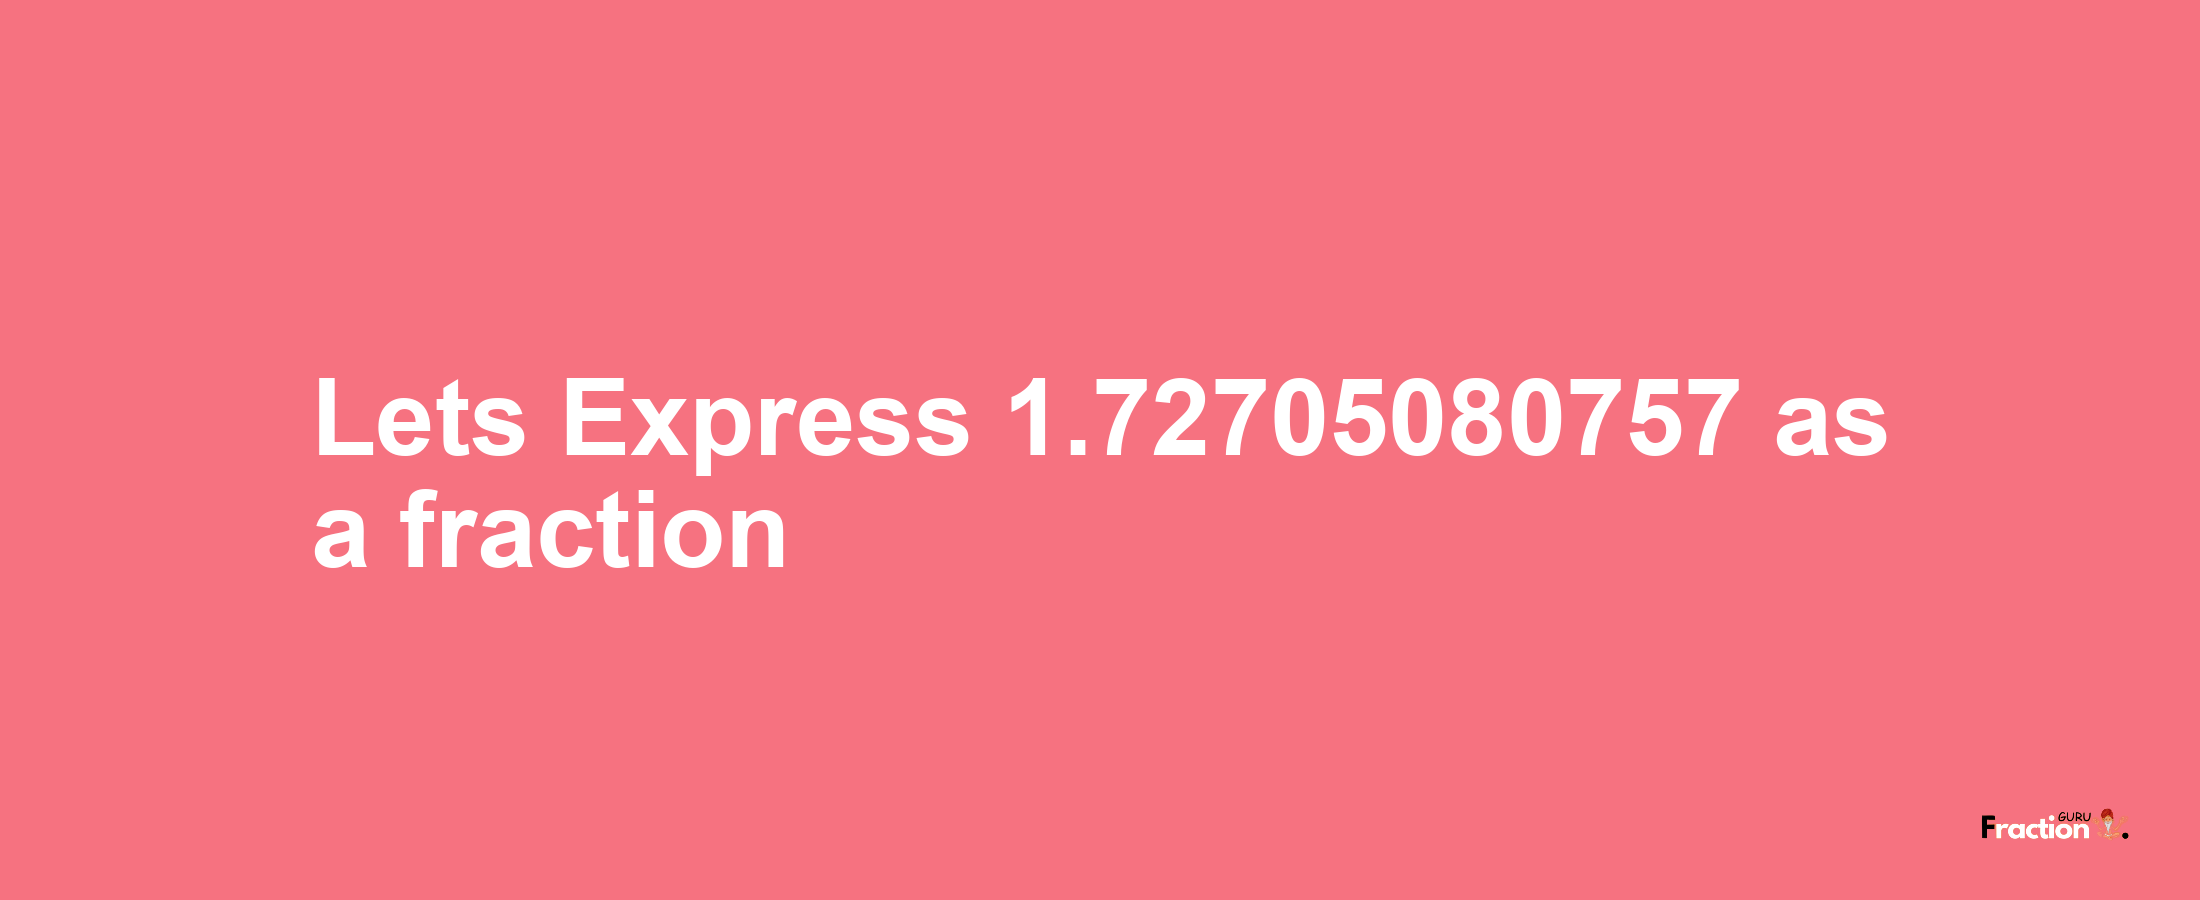 Lets Express 1.72705080757 as afraction